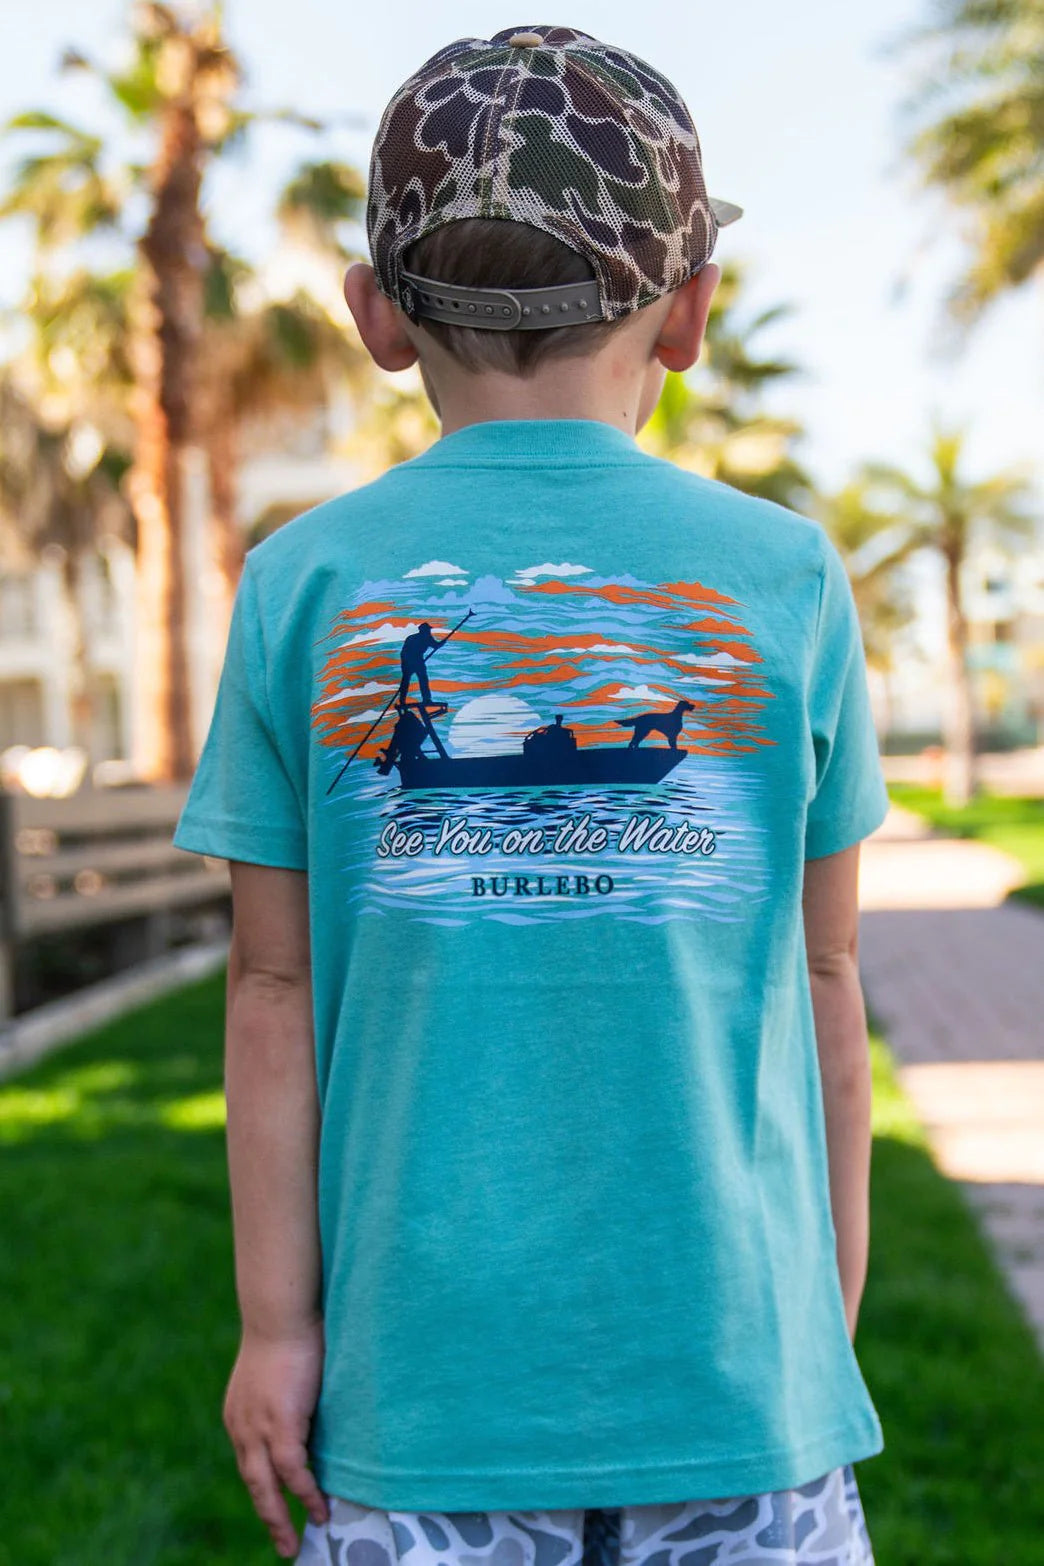 Burlebo - See You On The Water Tee Youth - KC Outfitter